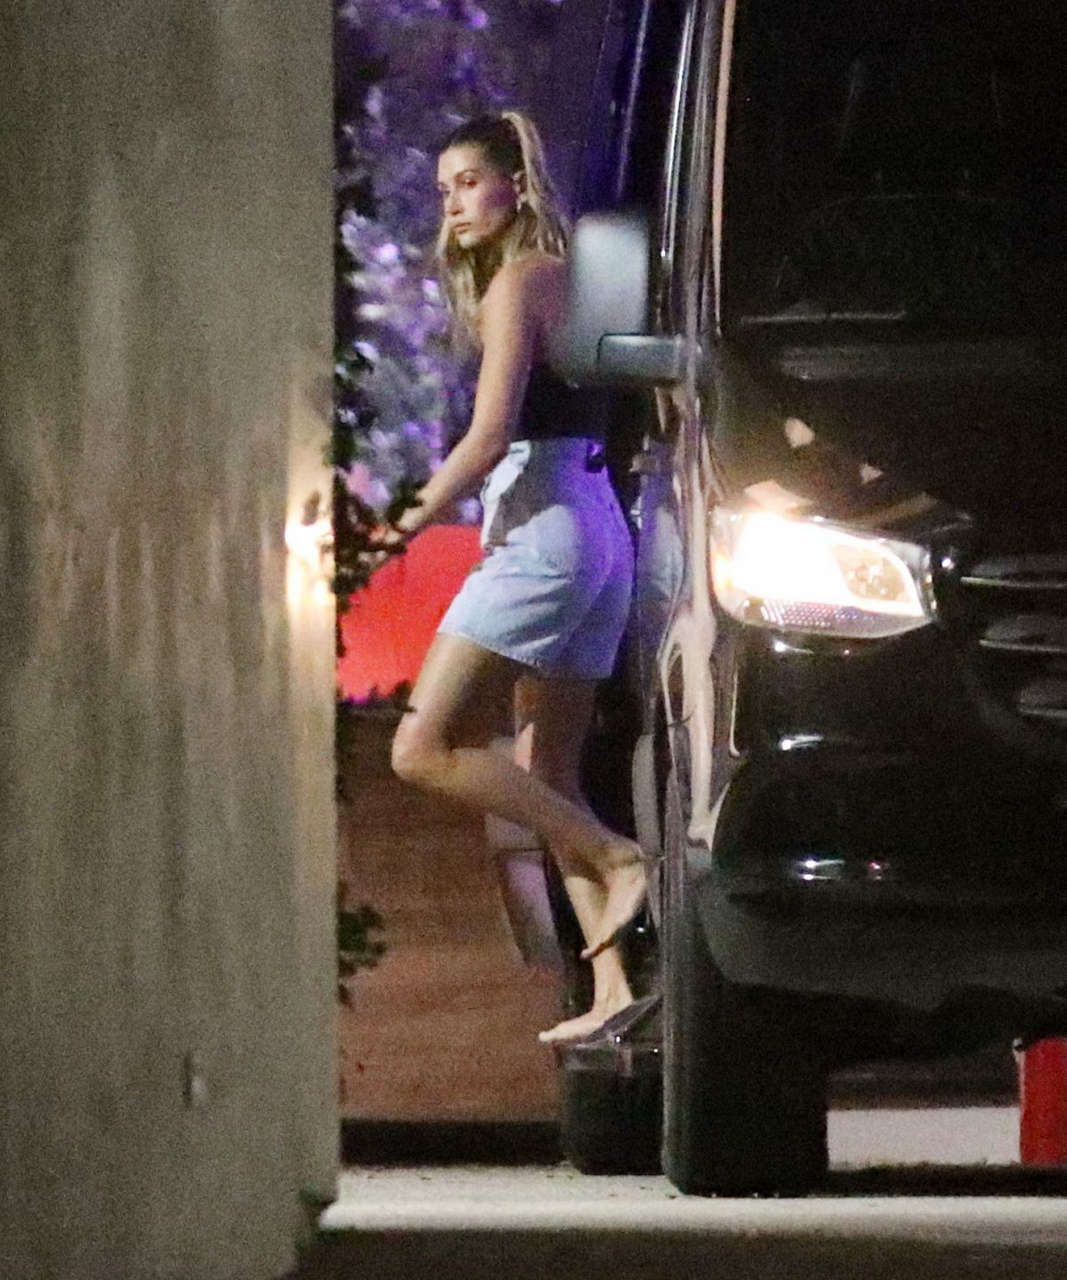 Hailey Justin Bieber Throw House Party Beverly Hills